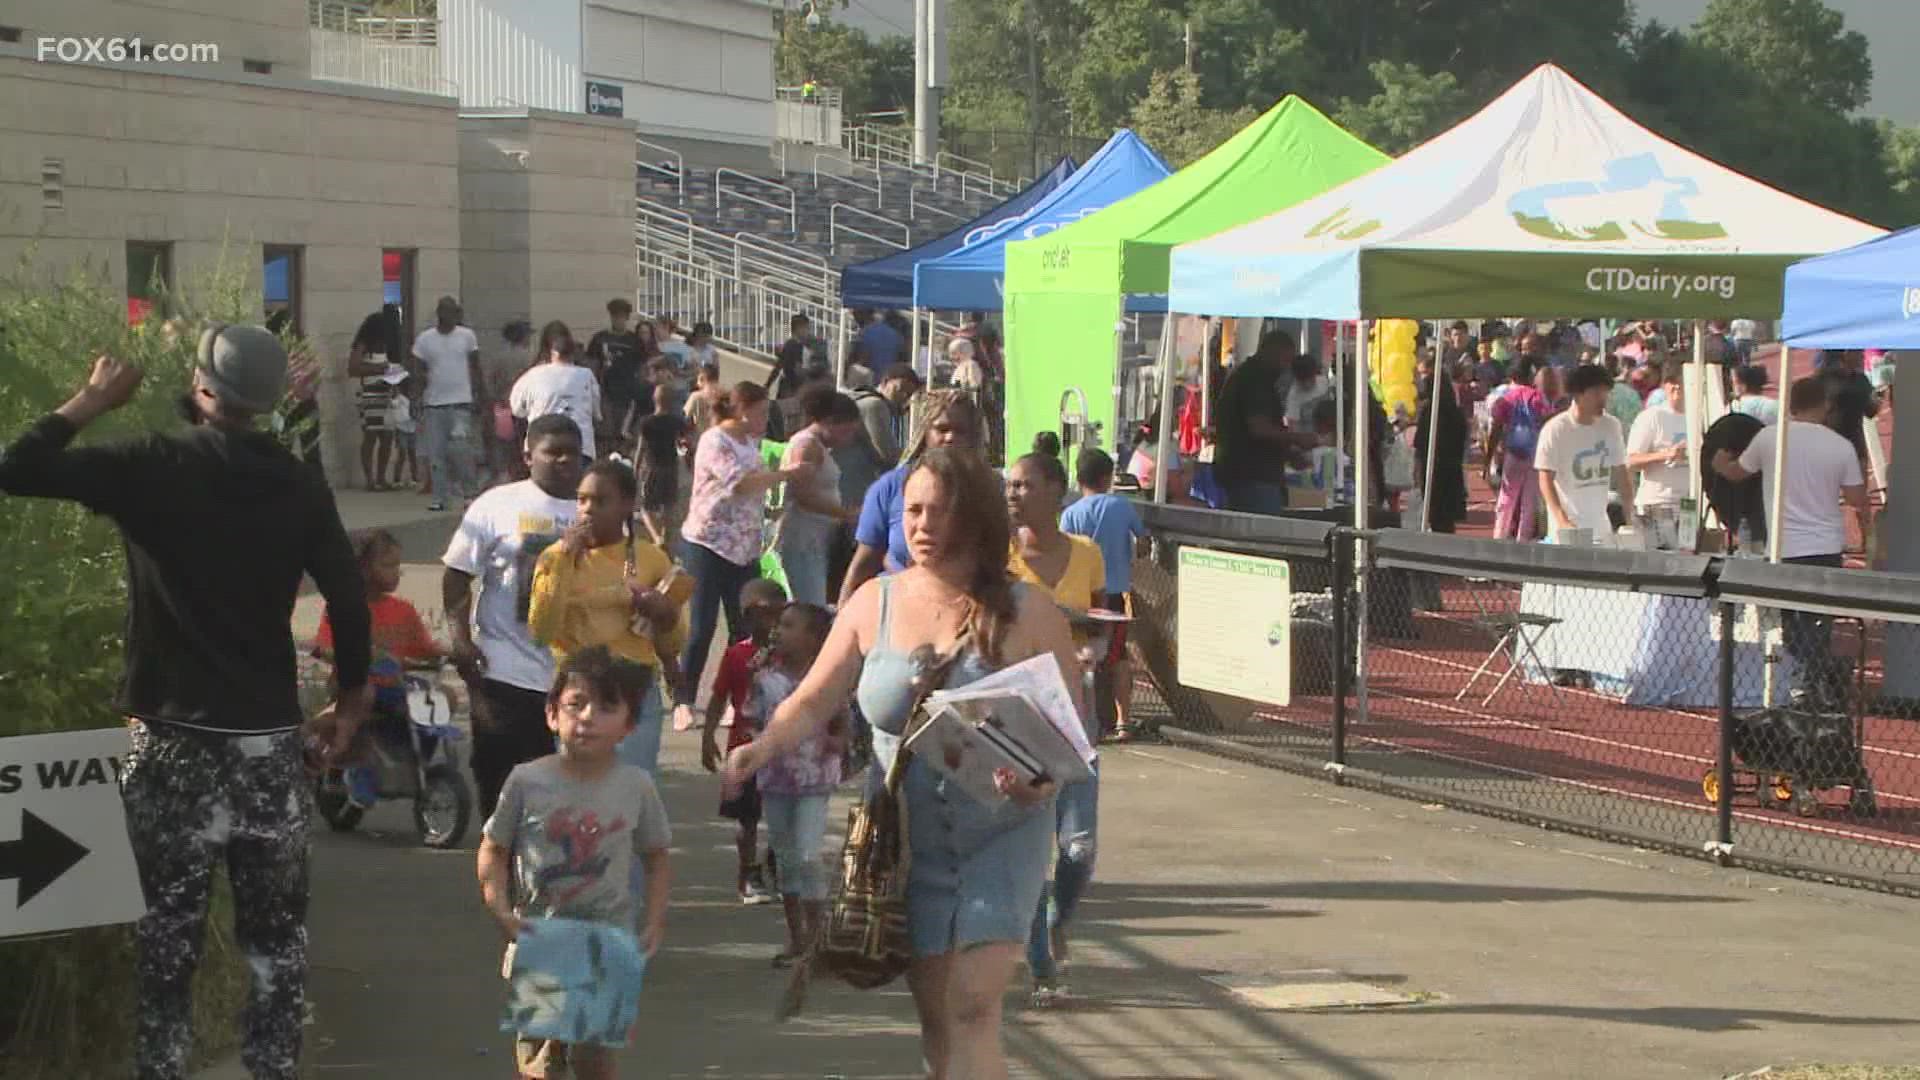 Families were getting excited at the annual back-to-school rally, where thousands of students were able to pick up everything they needed for a successful year.